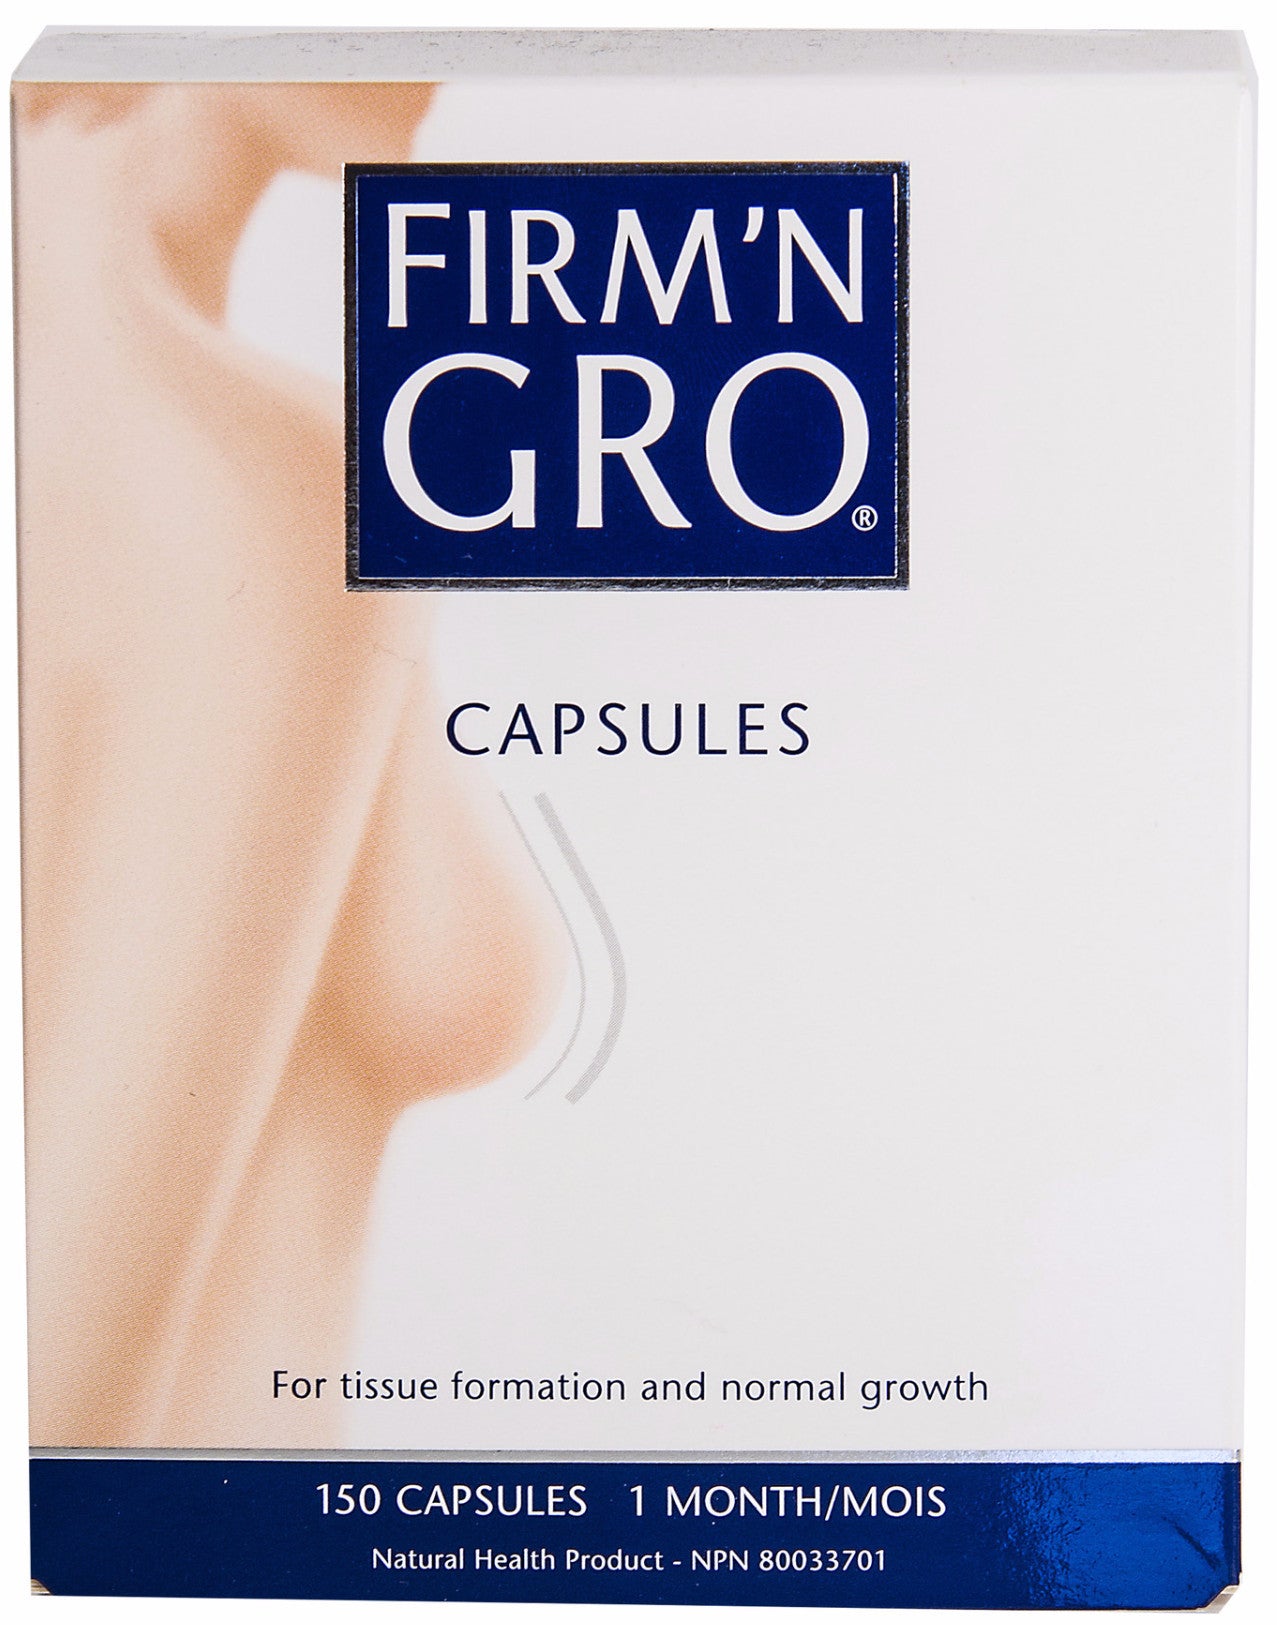 Firm'N Gro 150 Capsules by Firm'N Gro - Ebambu.ca natural health product store - free shipping <59$ 